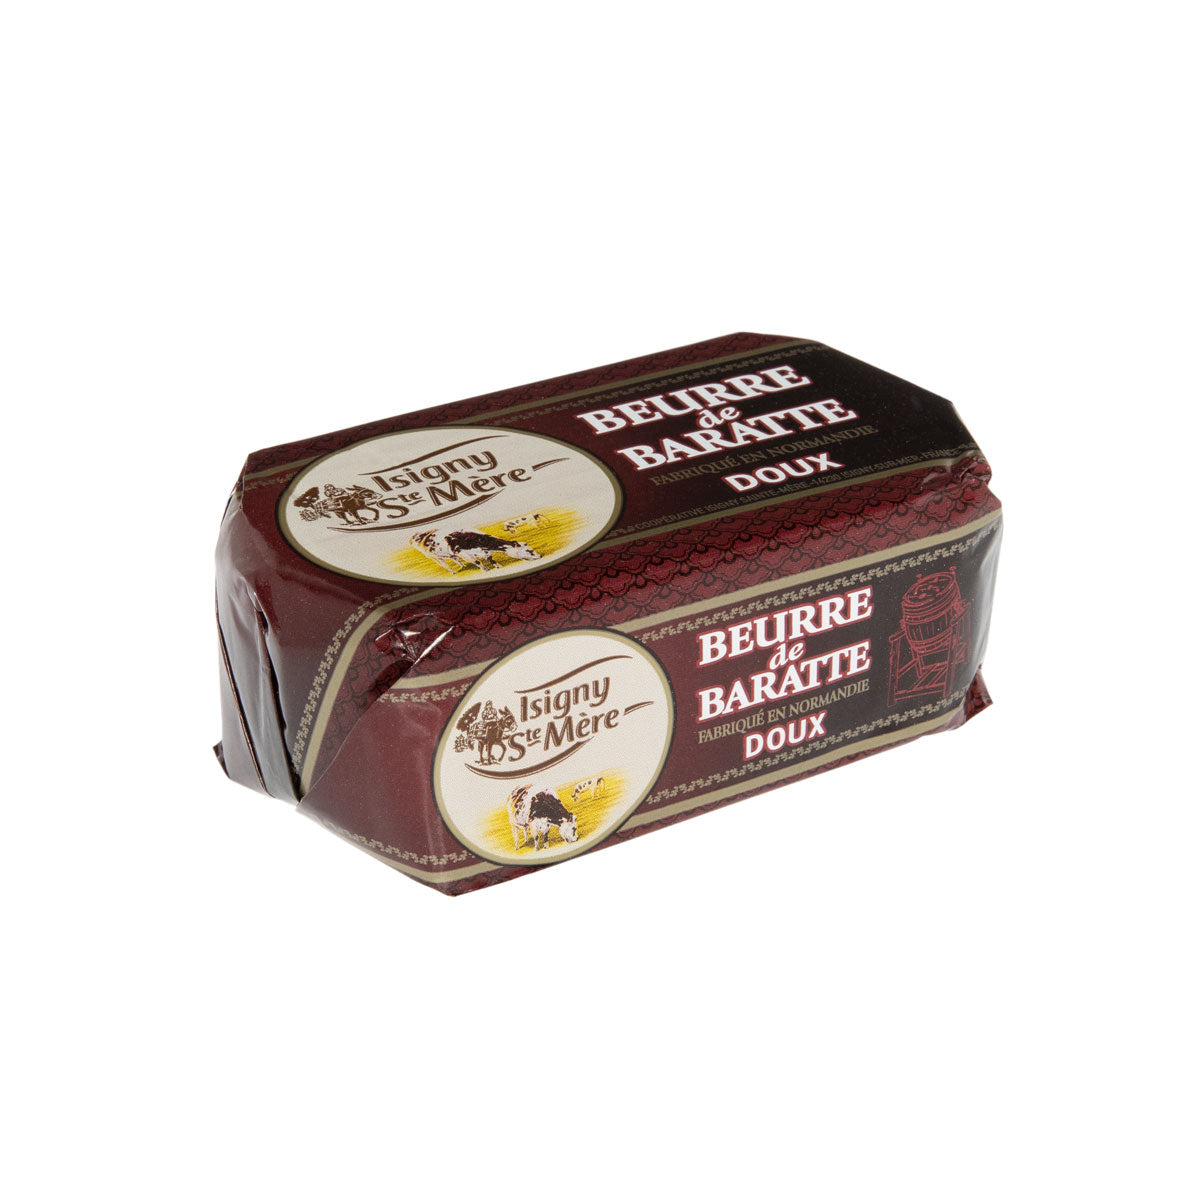 Isigny Sainte Mere Unsalted French Butter 8.8 OZ